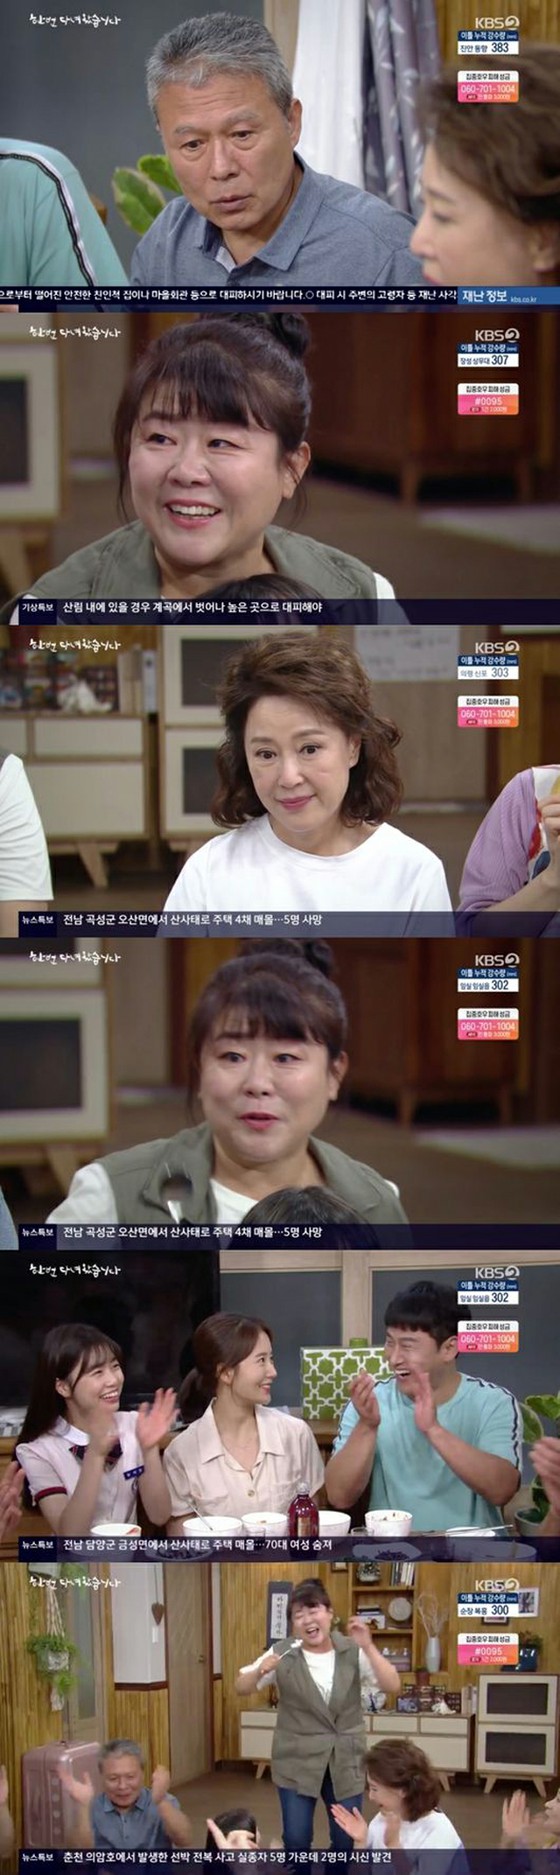 TV Series "I've Been There Once" Lee Jung Eun, tears to welcome family members "Today is the best day of my life"